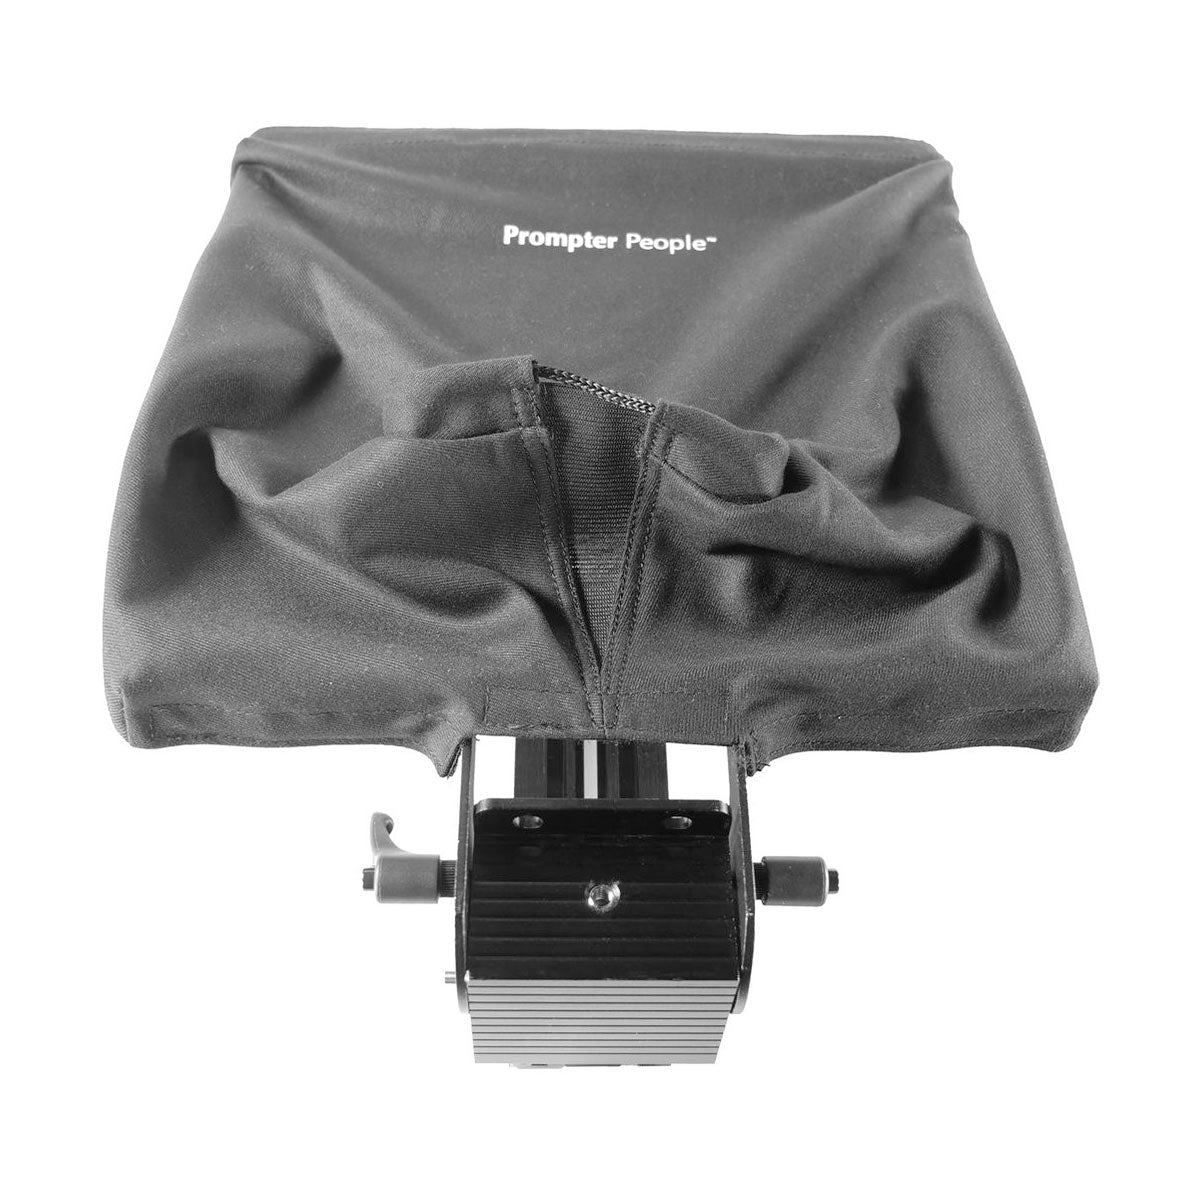 Prompter People Prompter Pal Teleprompter with Tablet Cradle (10"x10" Glass)